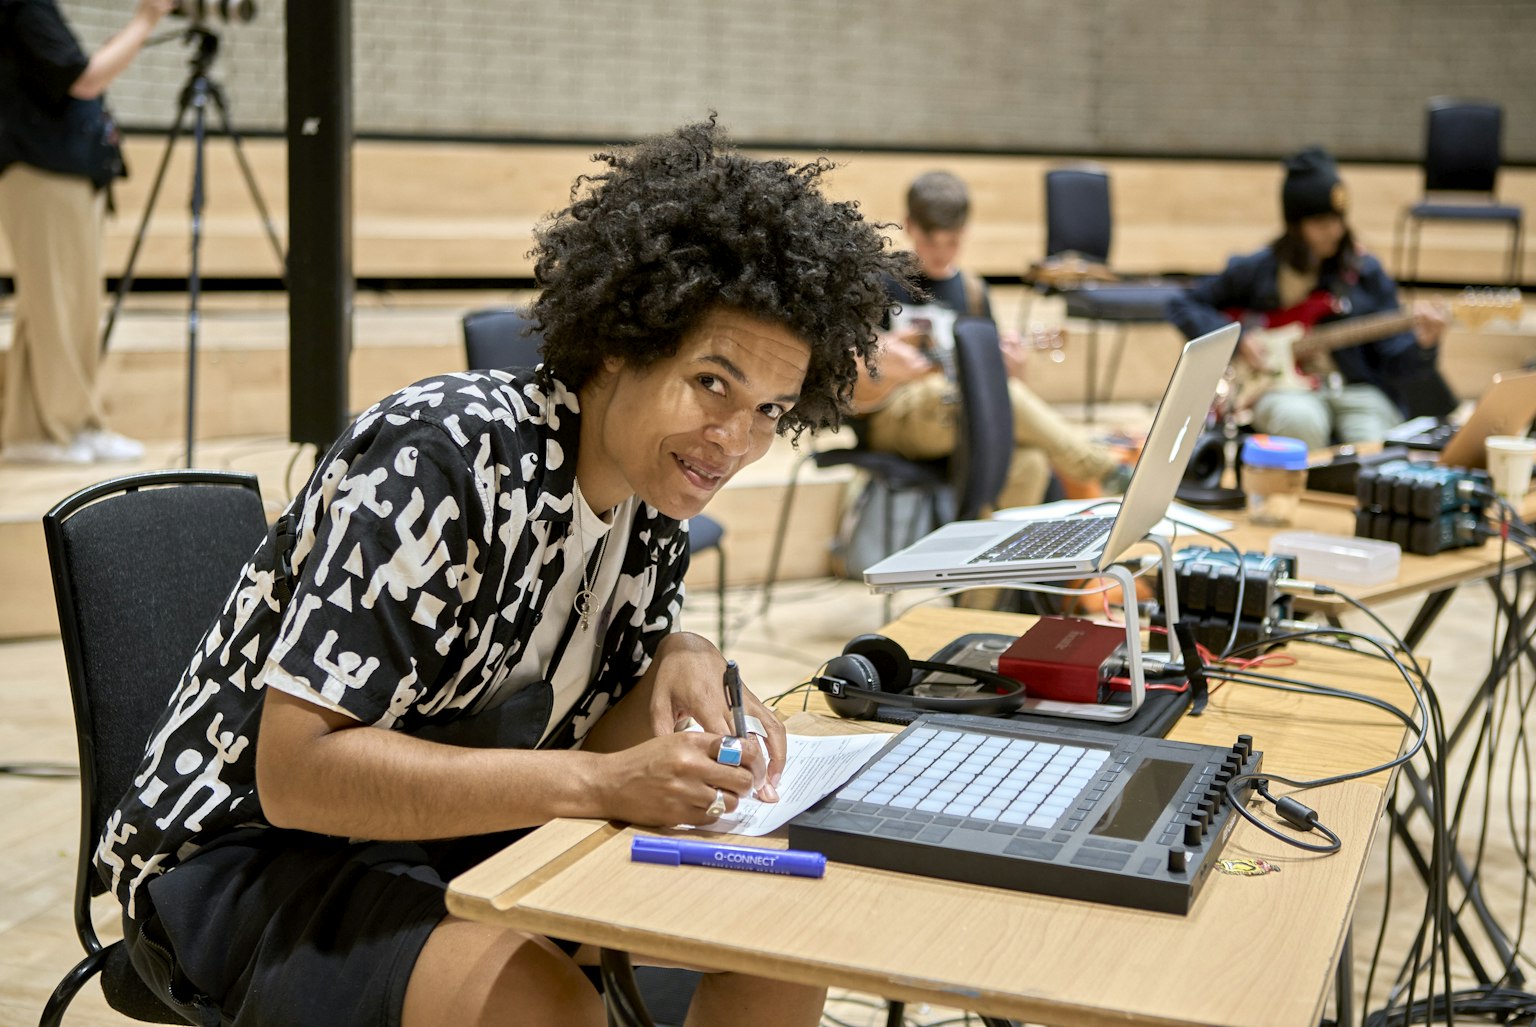 A music practitioner is looking up from writing on a desk, and smiling to the camera. They are surrounded by music equipment and young musicians can be seen in the background.